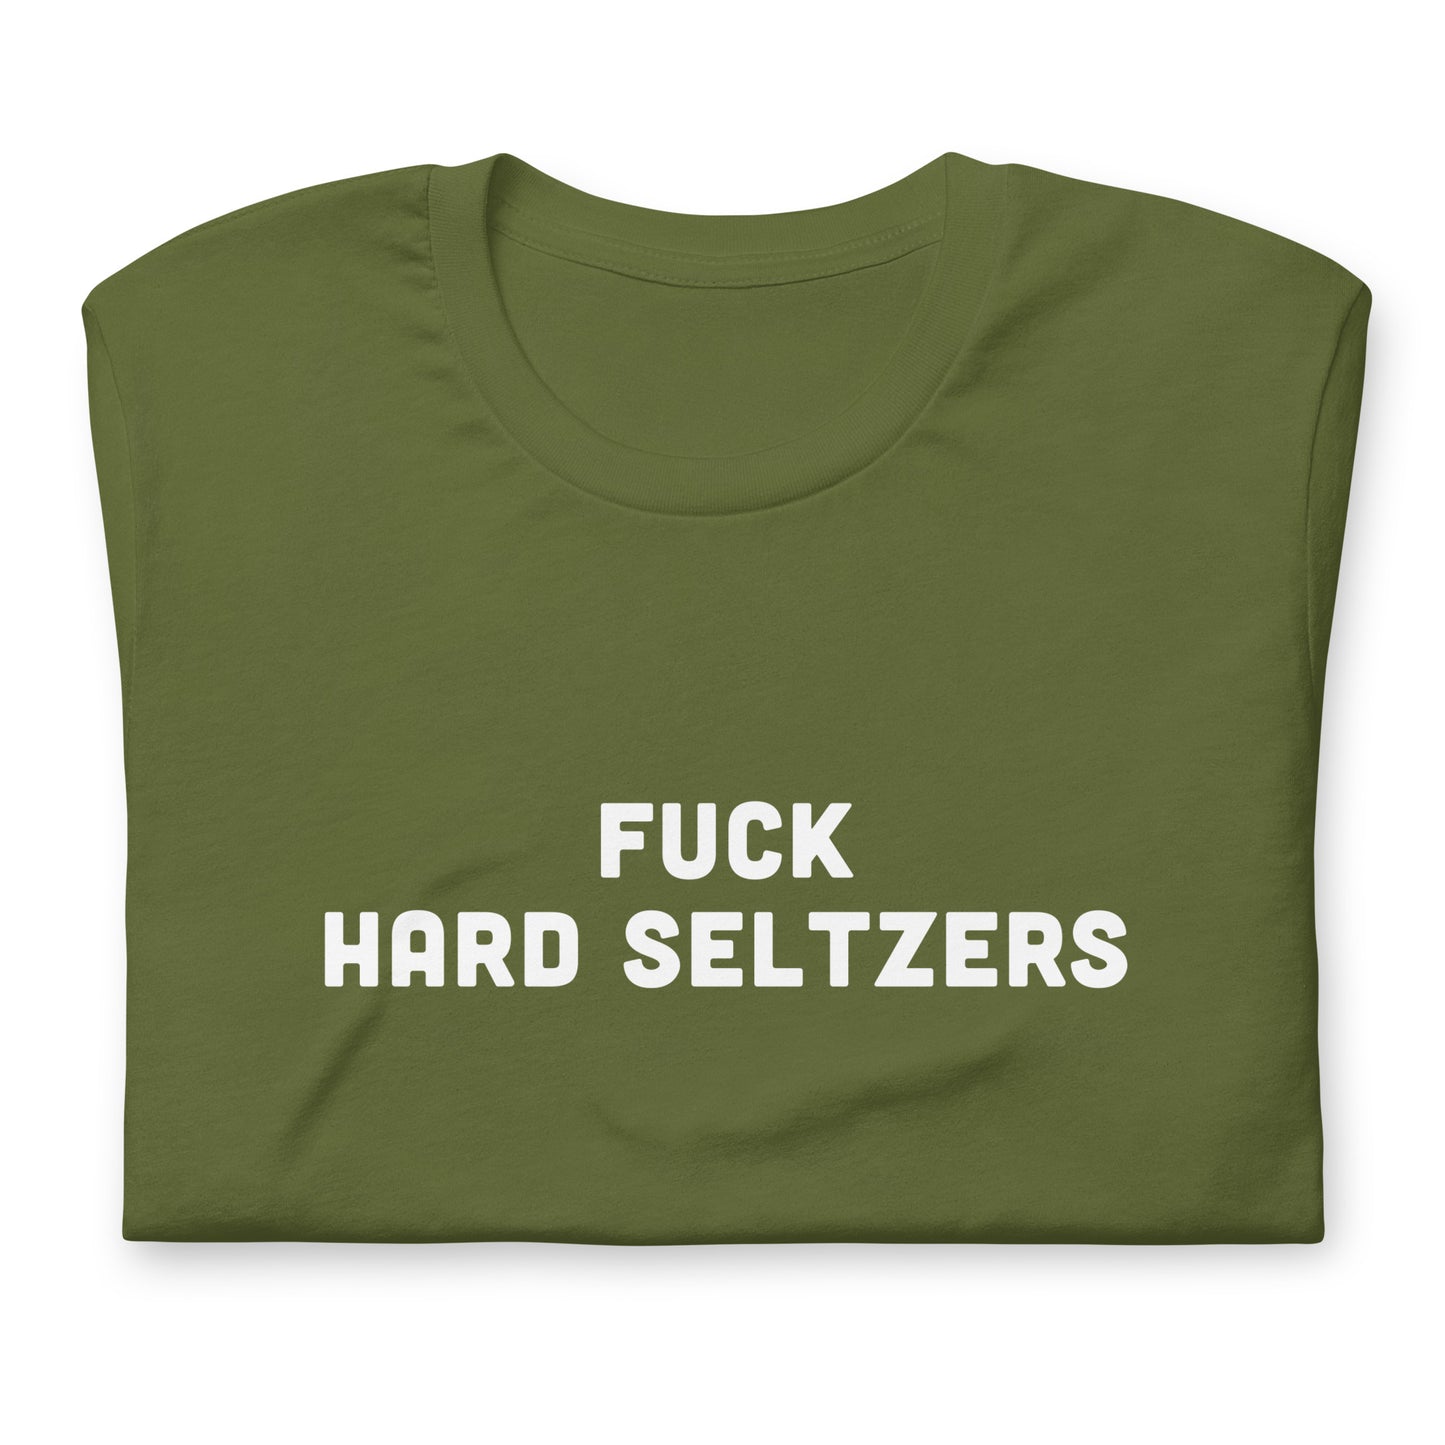 Fuck Hard Seltzers T-Shirt Size M Color Navy